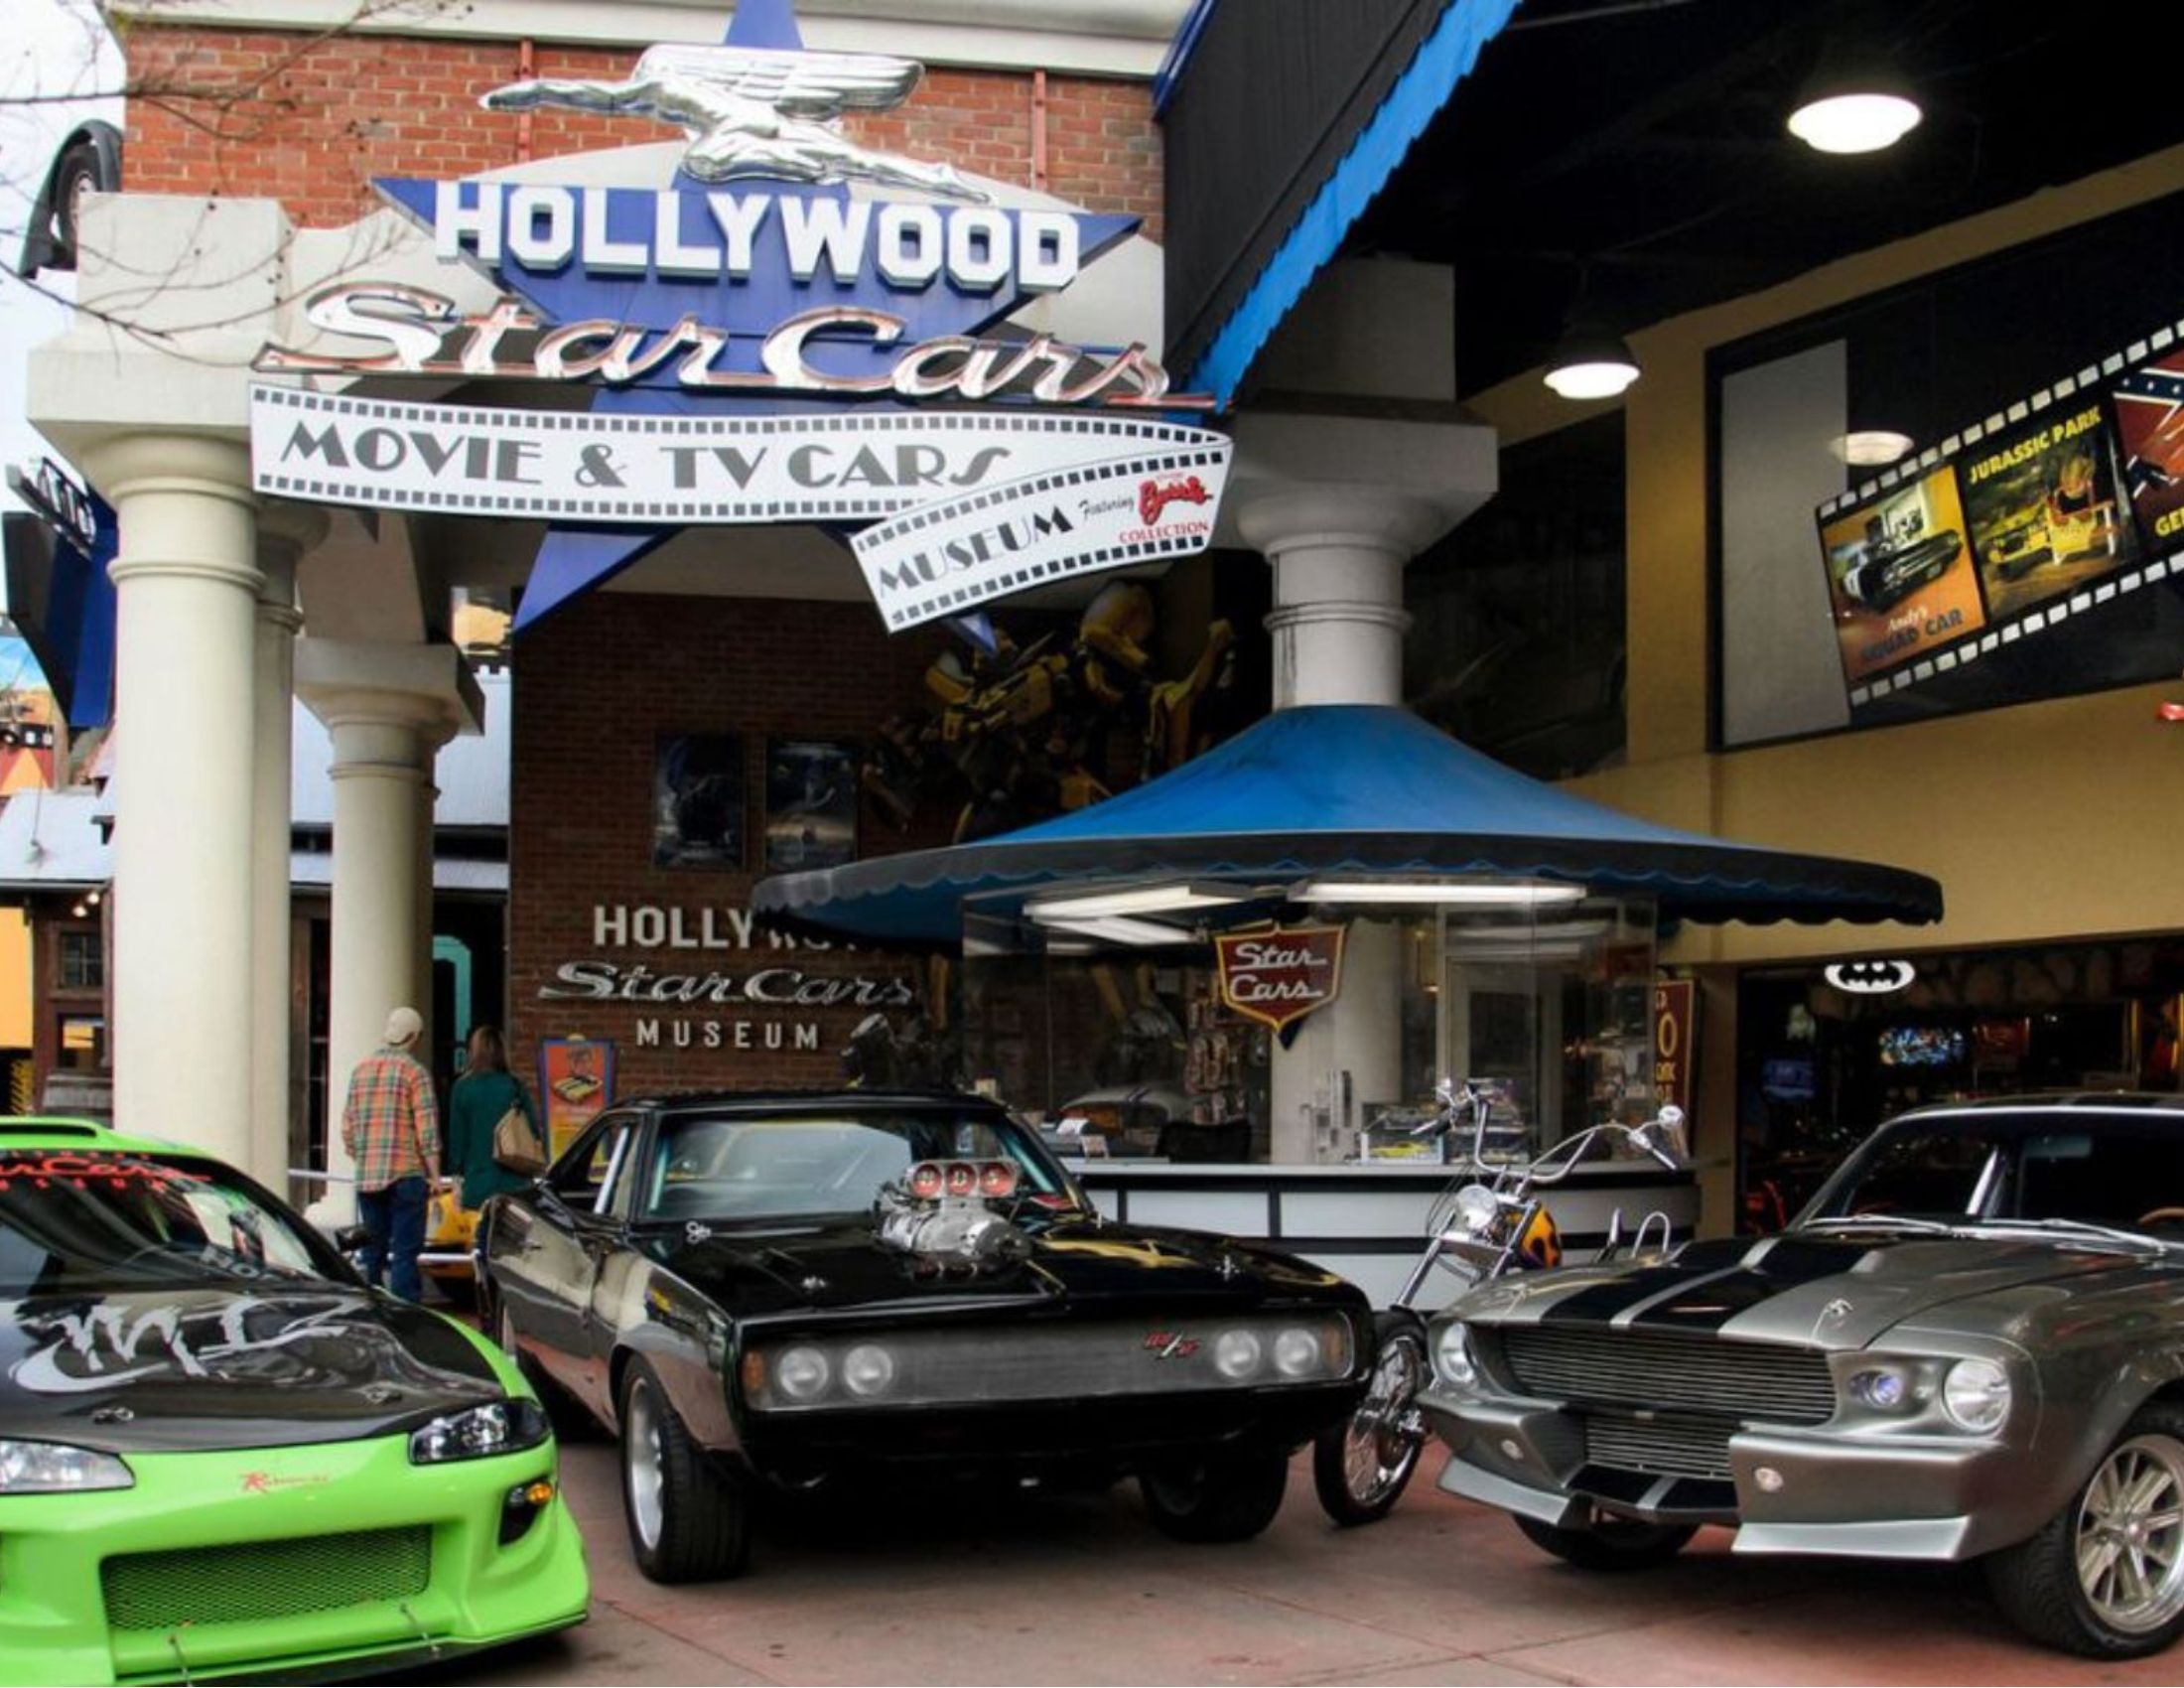 Hollywood Star Cars Museum